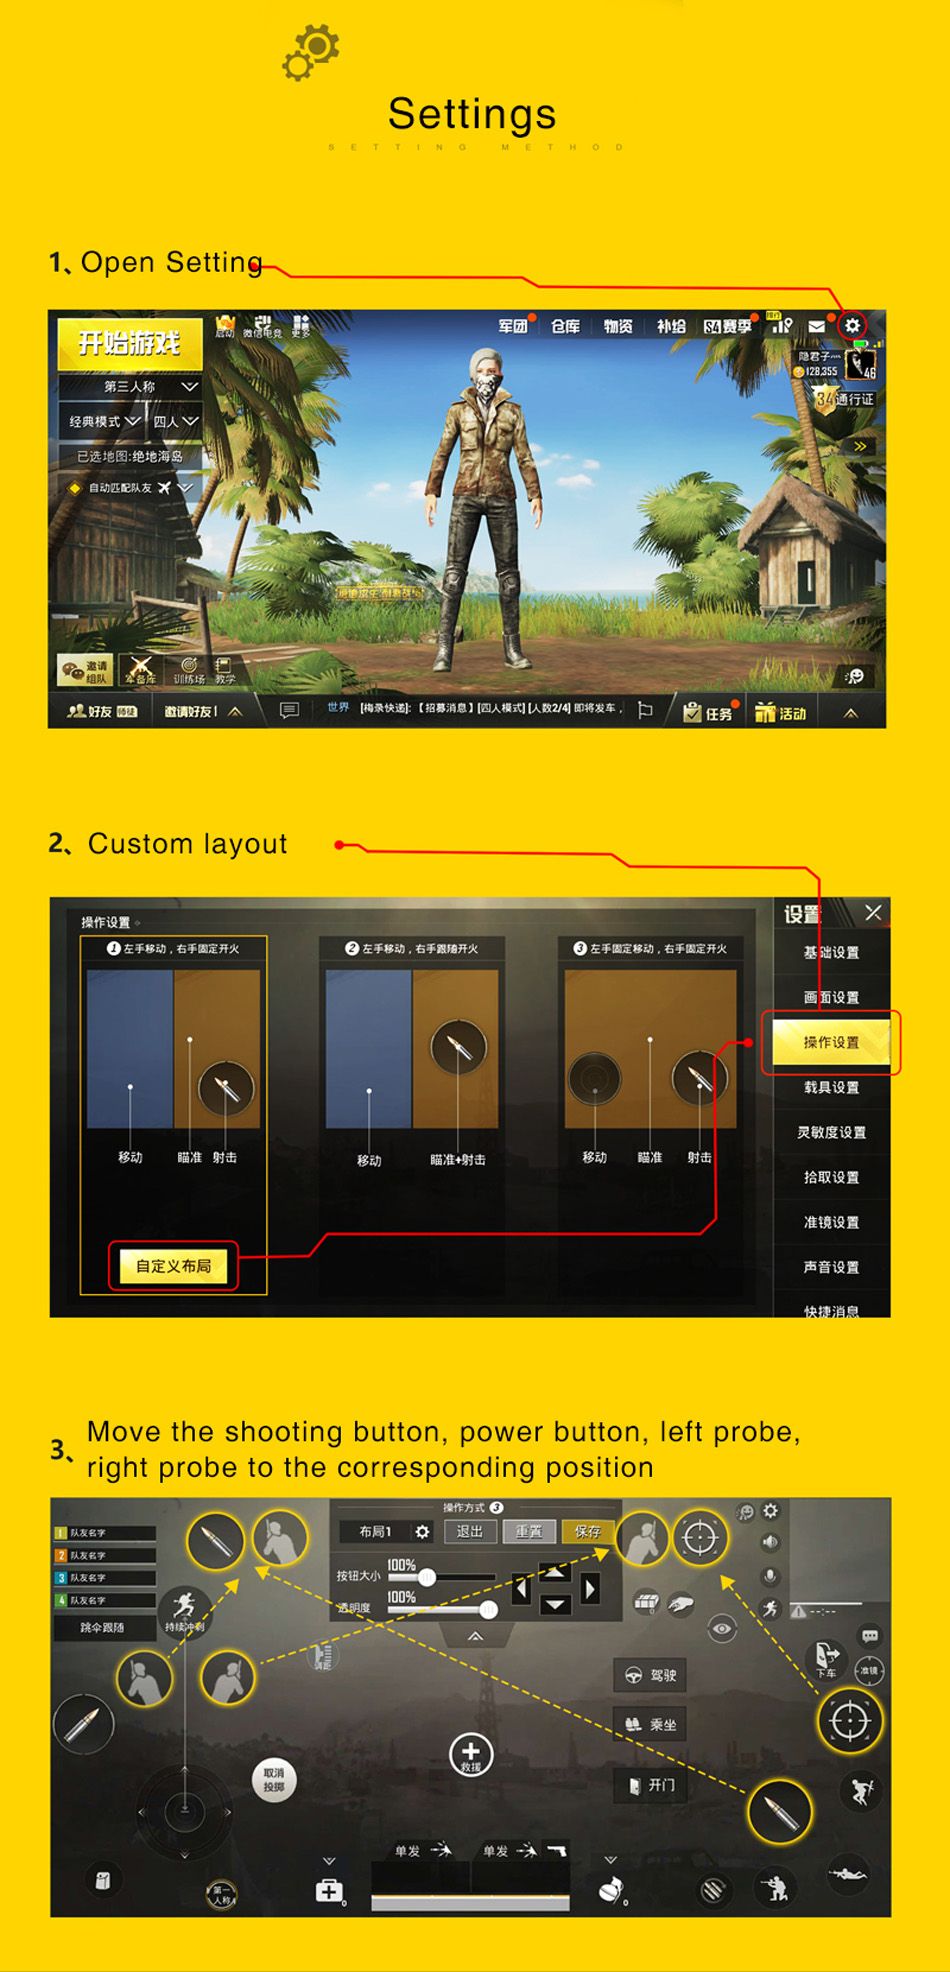 Gamepad-Joystick-Game-Controller-for-PUBG-Mobile-Game-for-IOS-Android-Phone-1452797